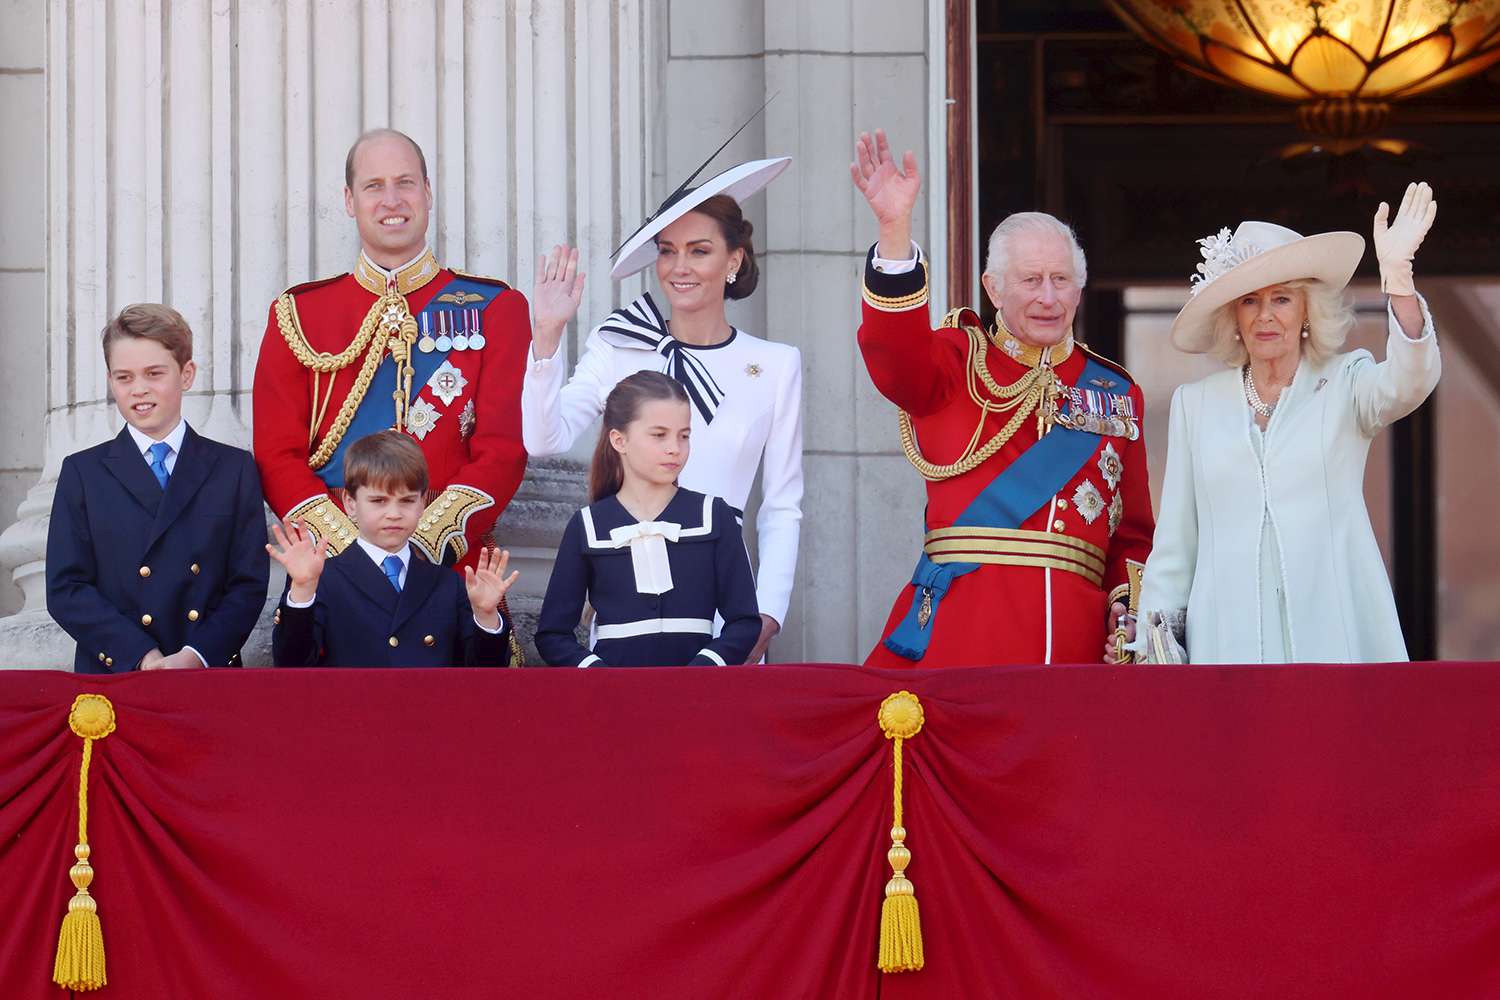 Prince George of Wales, Prince William, Prince of Wales, Prince Louis of Wales, Princess Charlotte of Wales, Catherine, Princess of Wales, King Charles III and Queen Camilla during Trooping the Colour at Buckingham Palace on June 15, 2024 in London